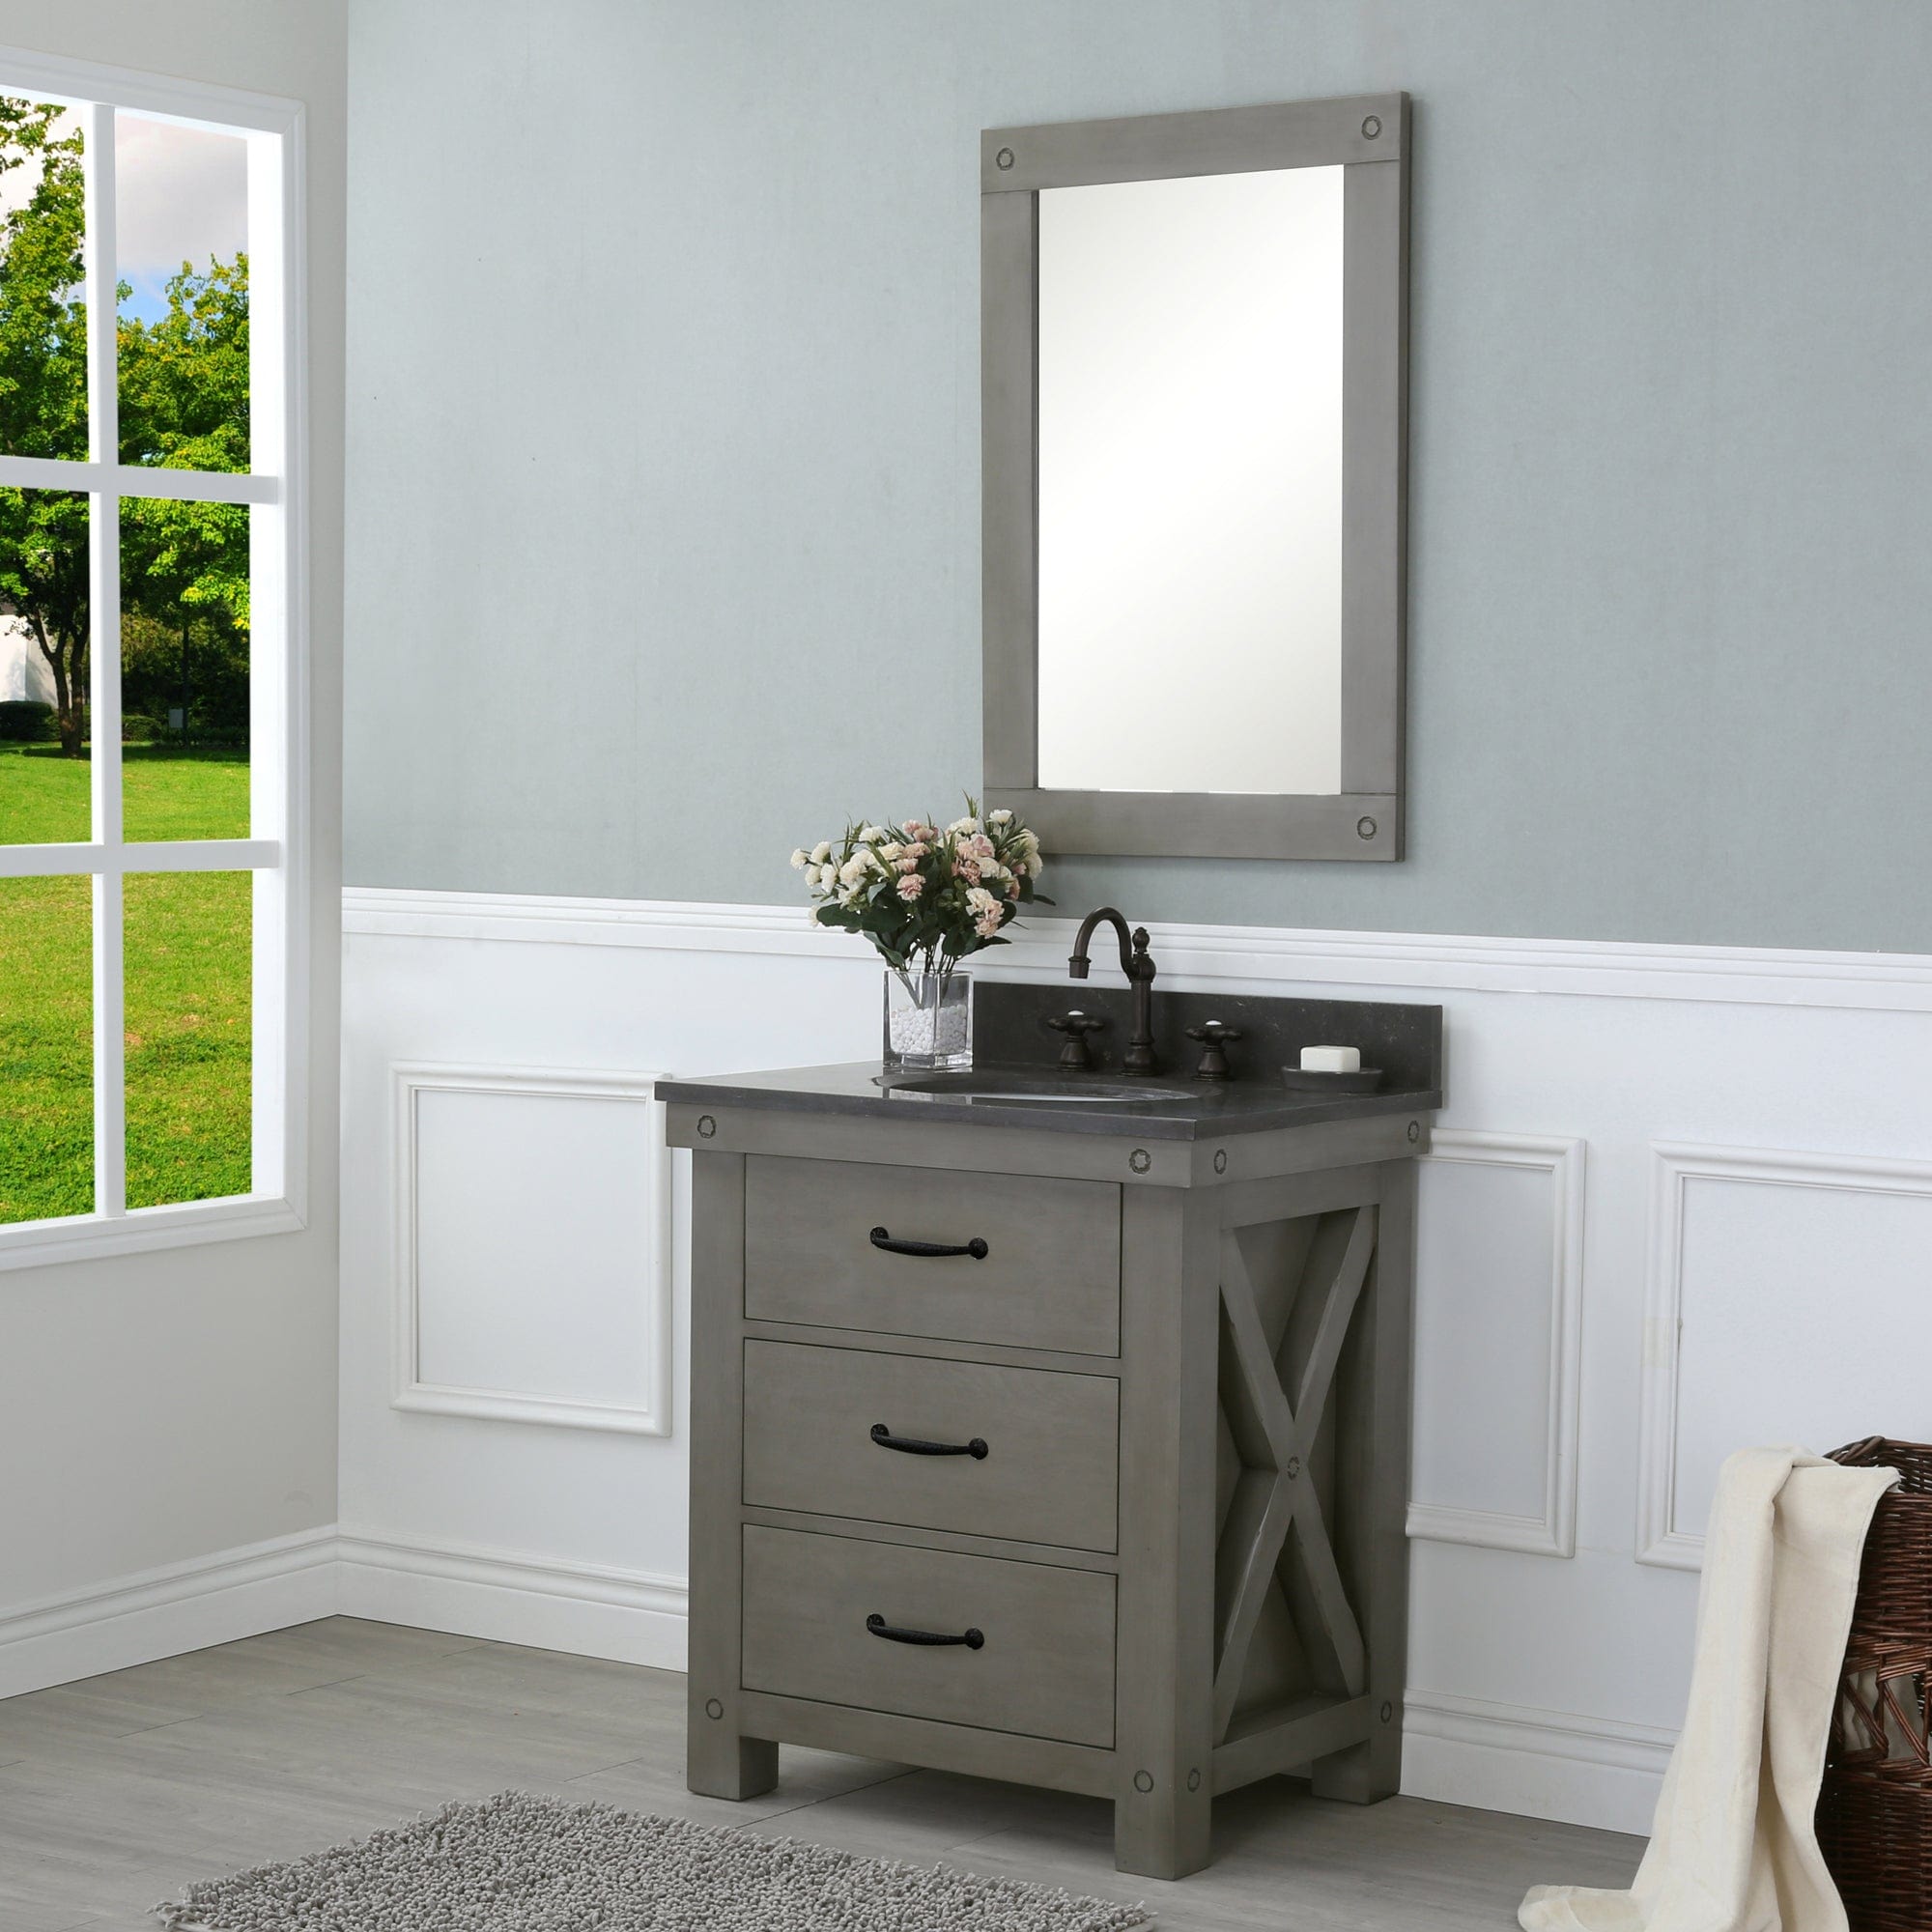 30 Inch Grizzle Grey Single Sink Bathroom Vanity With Mirror And Faucet With Blue Limestone Counter Top From The ABERDEEN Collection - Molaix732030749627Bathroom VanitiesAB30BL03GG-A24BX1203